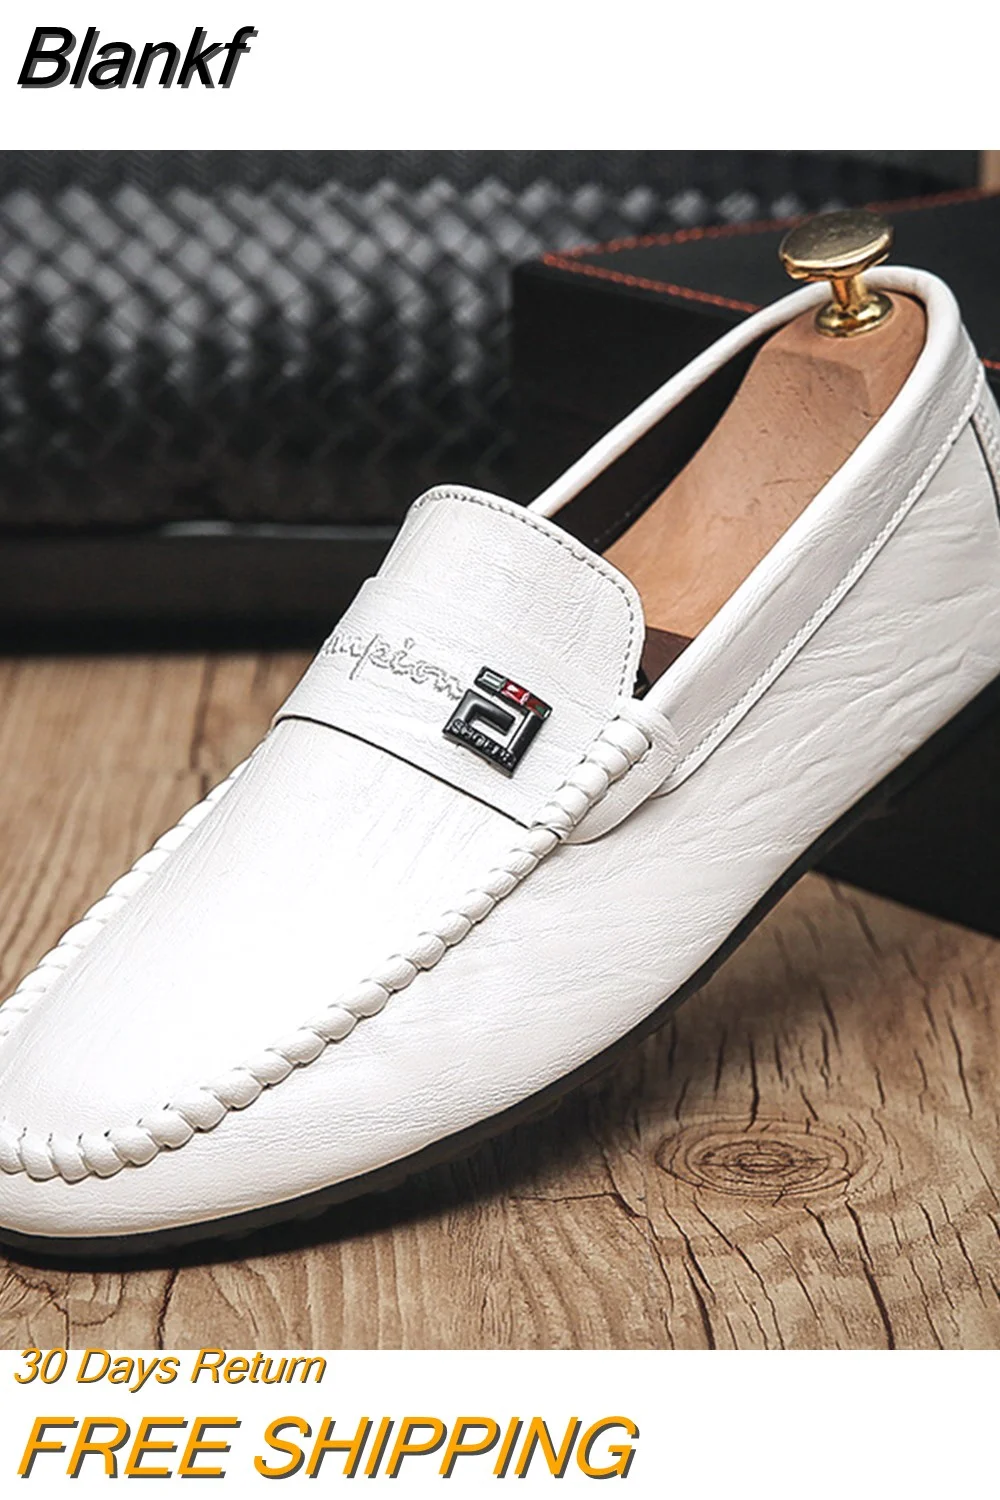 Blankf Spring Autumn Men's Dress Shoes White Loafers Leather Casual Shoes Slip on Moccasin Shoes Fashion Men Shoes Design Shoes